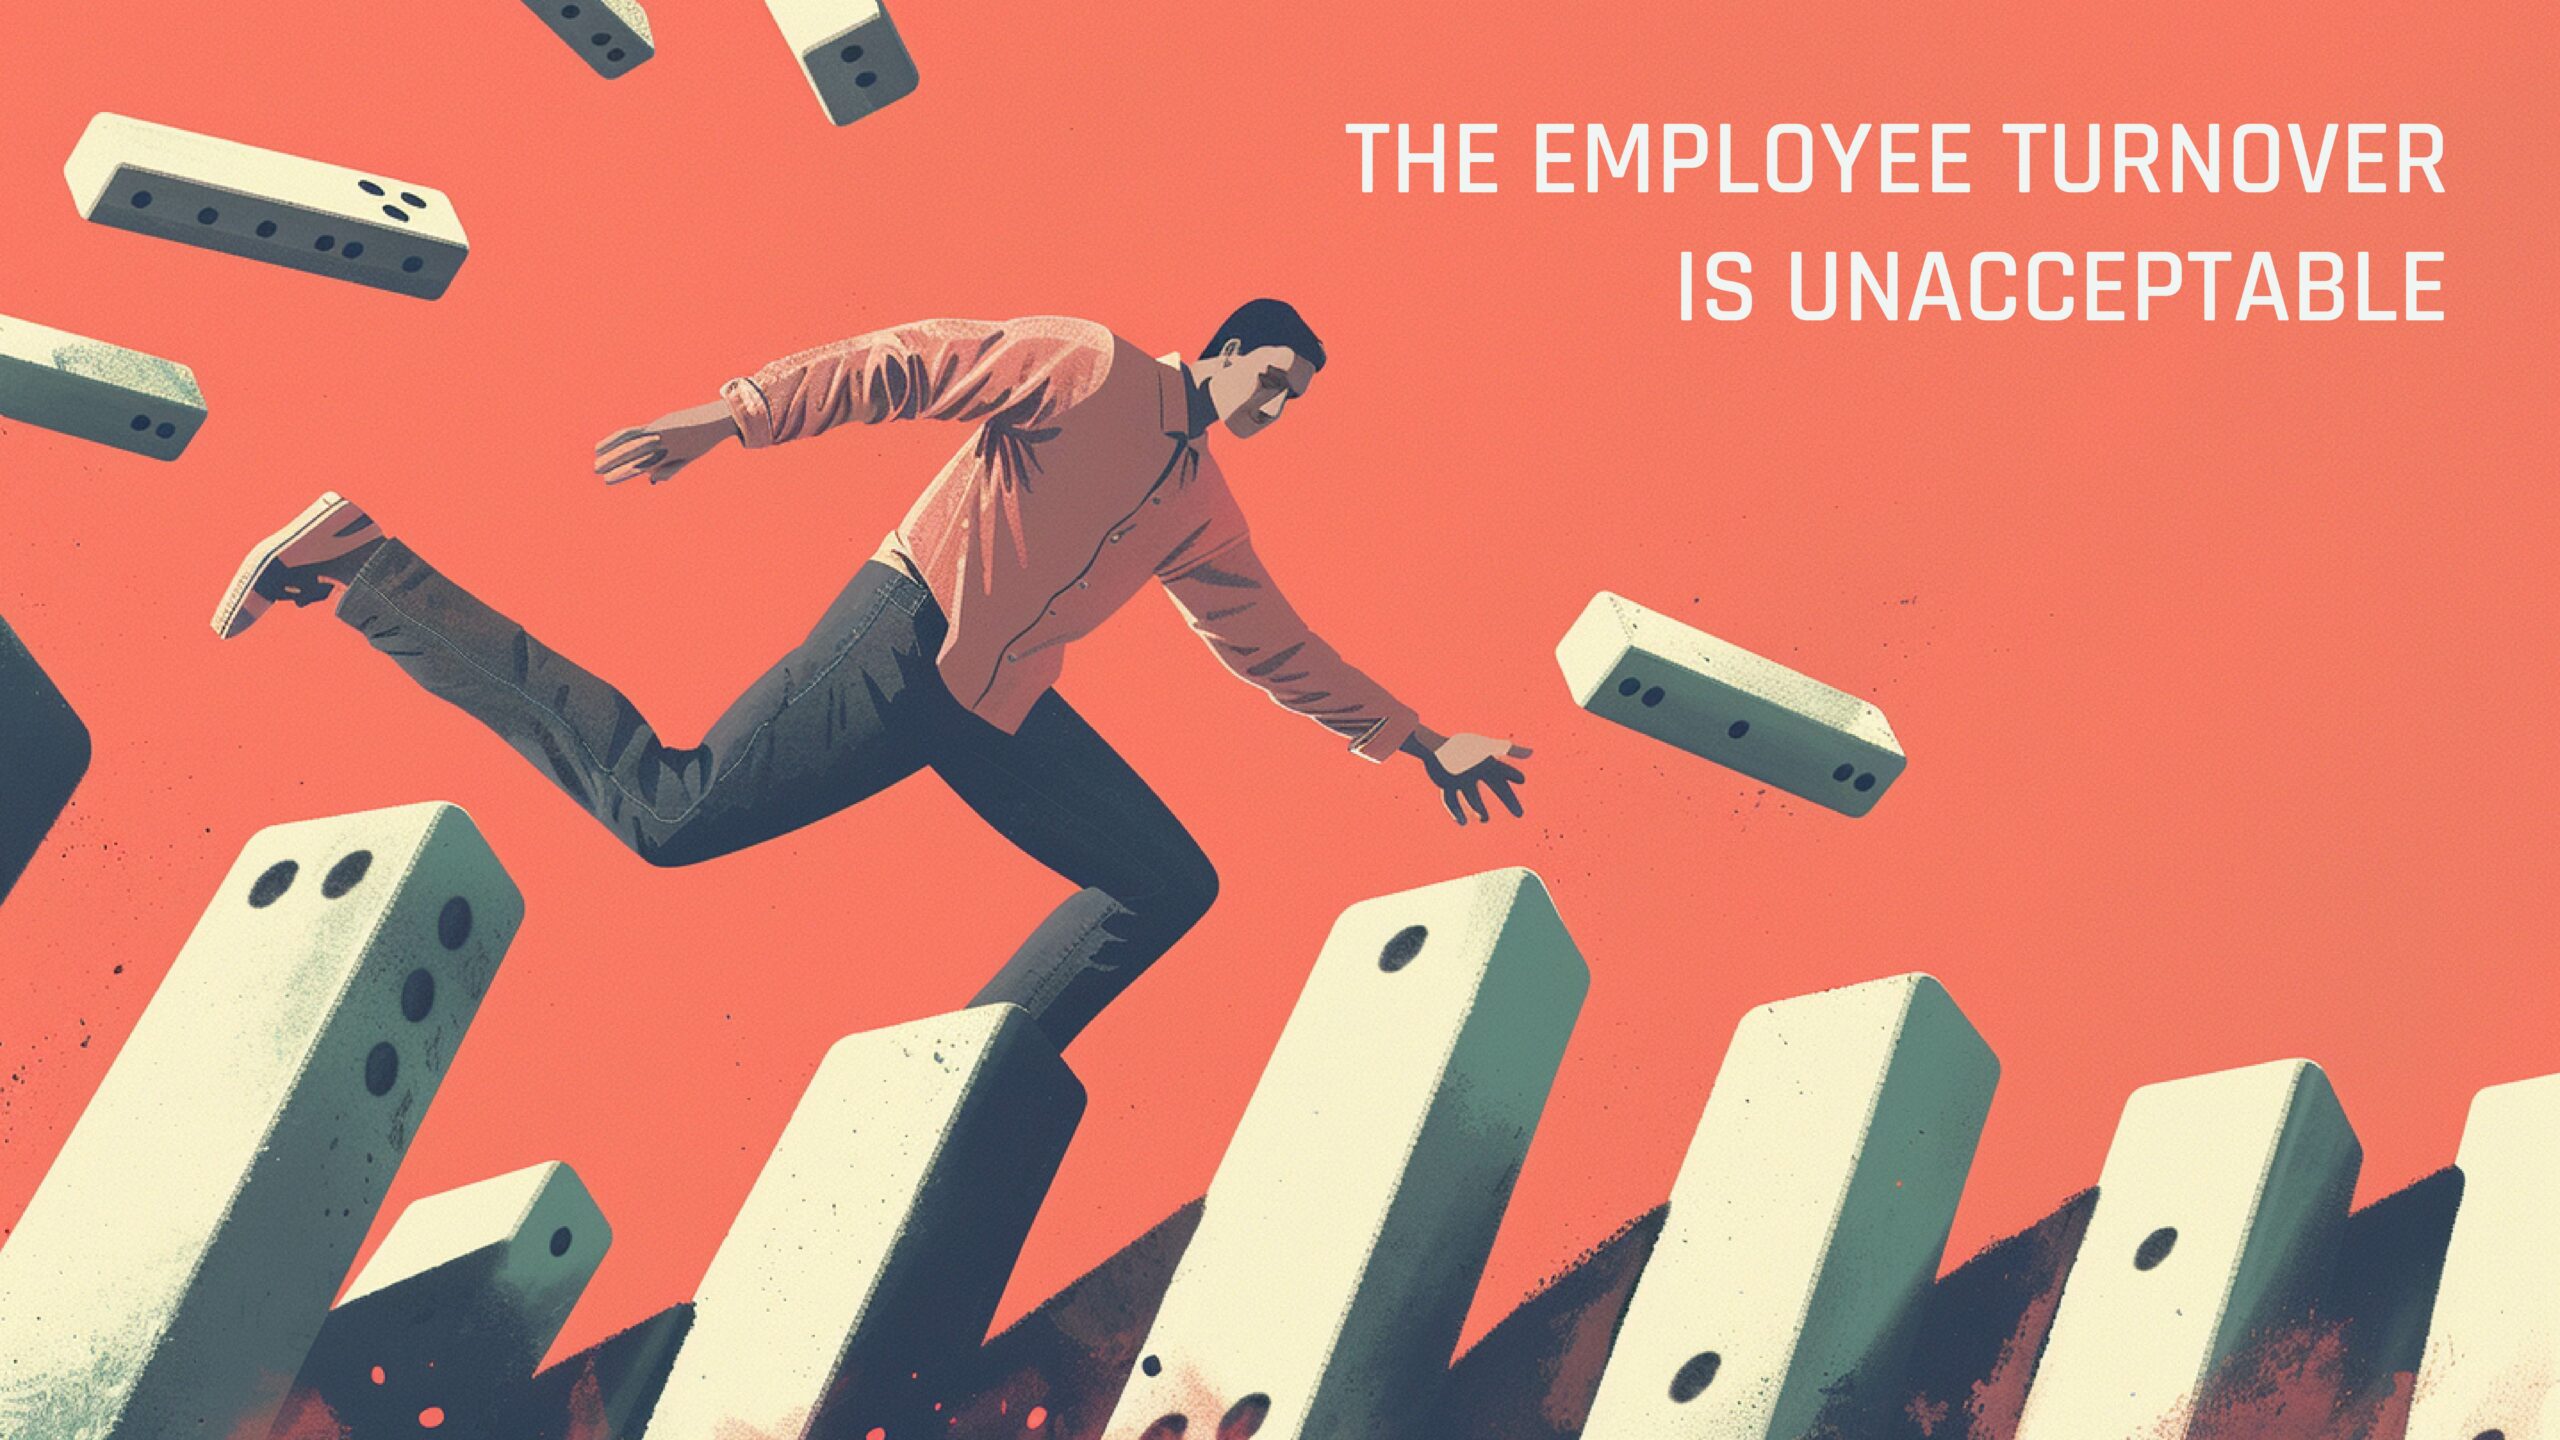 The Employee Turnover is Unacceptable